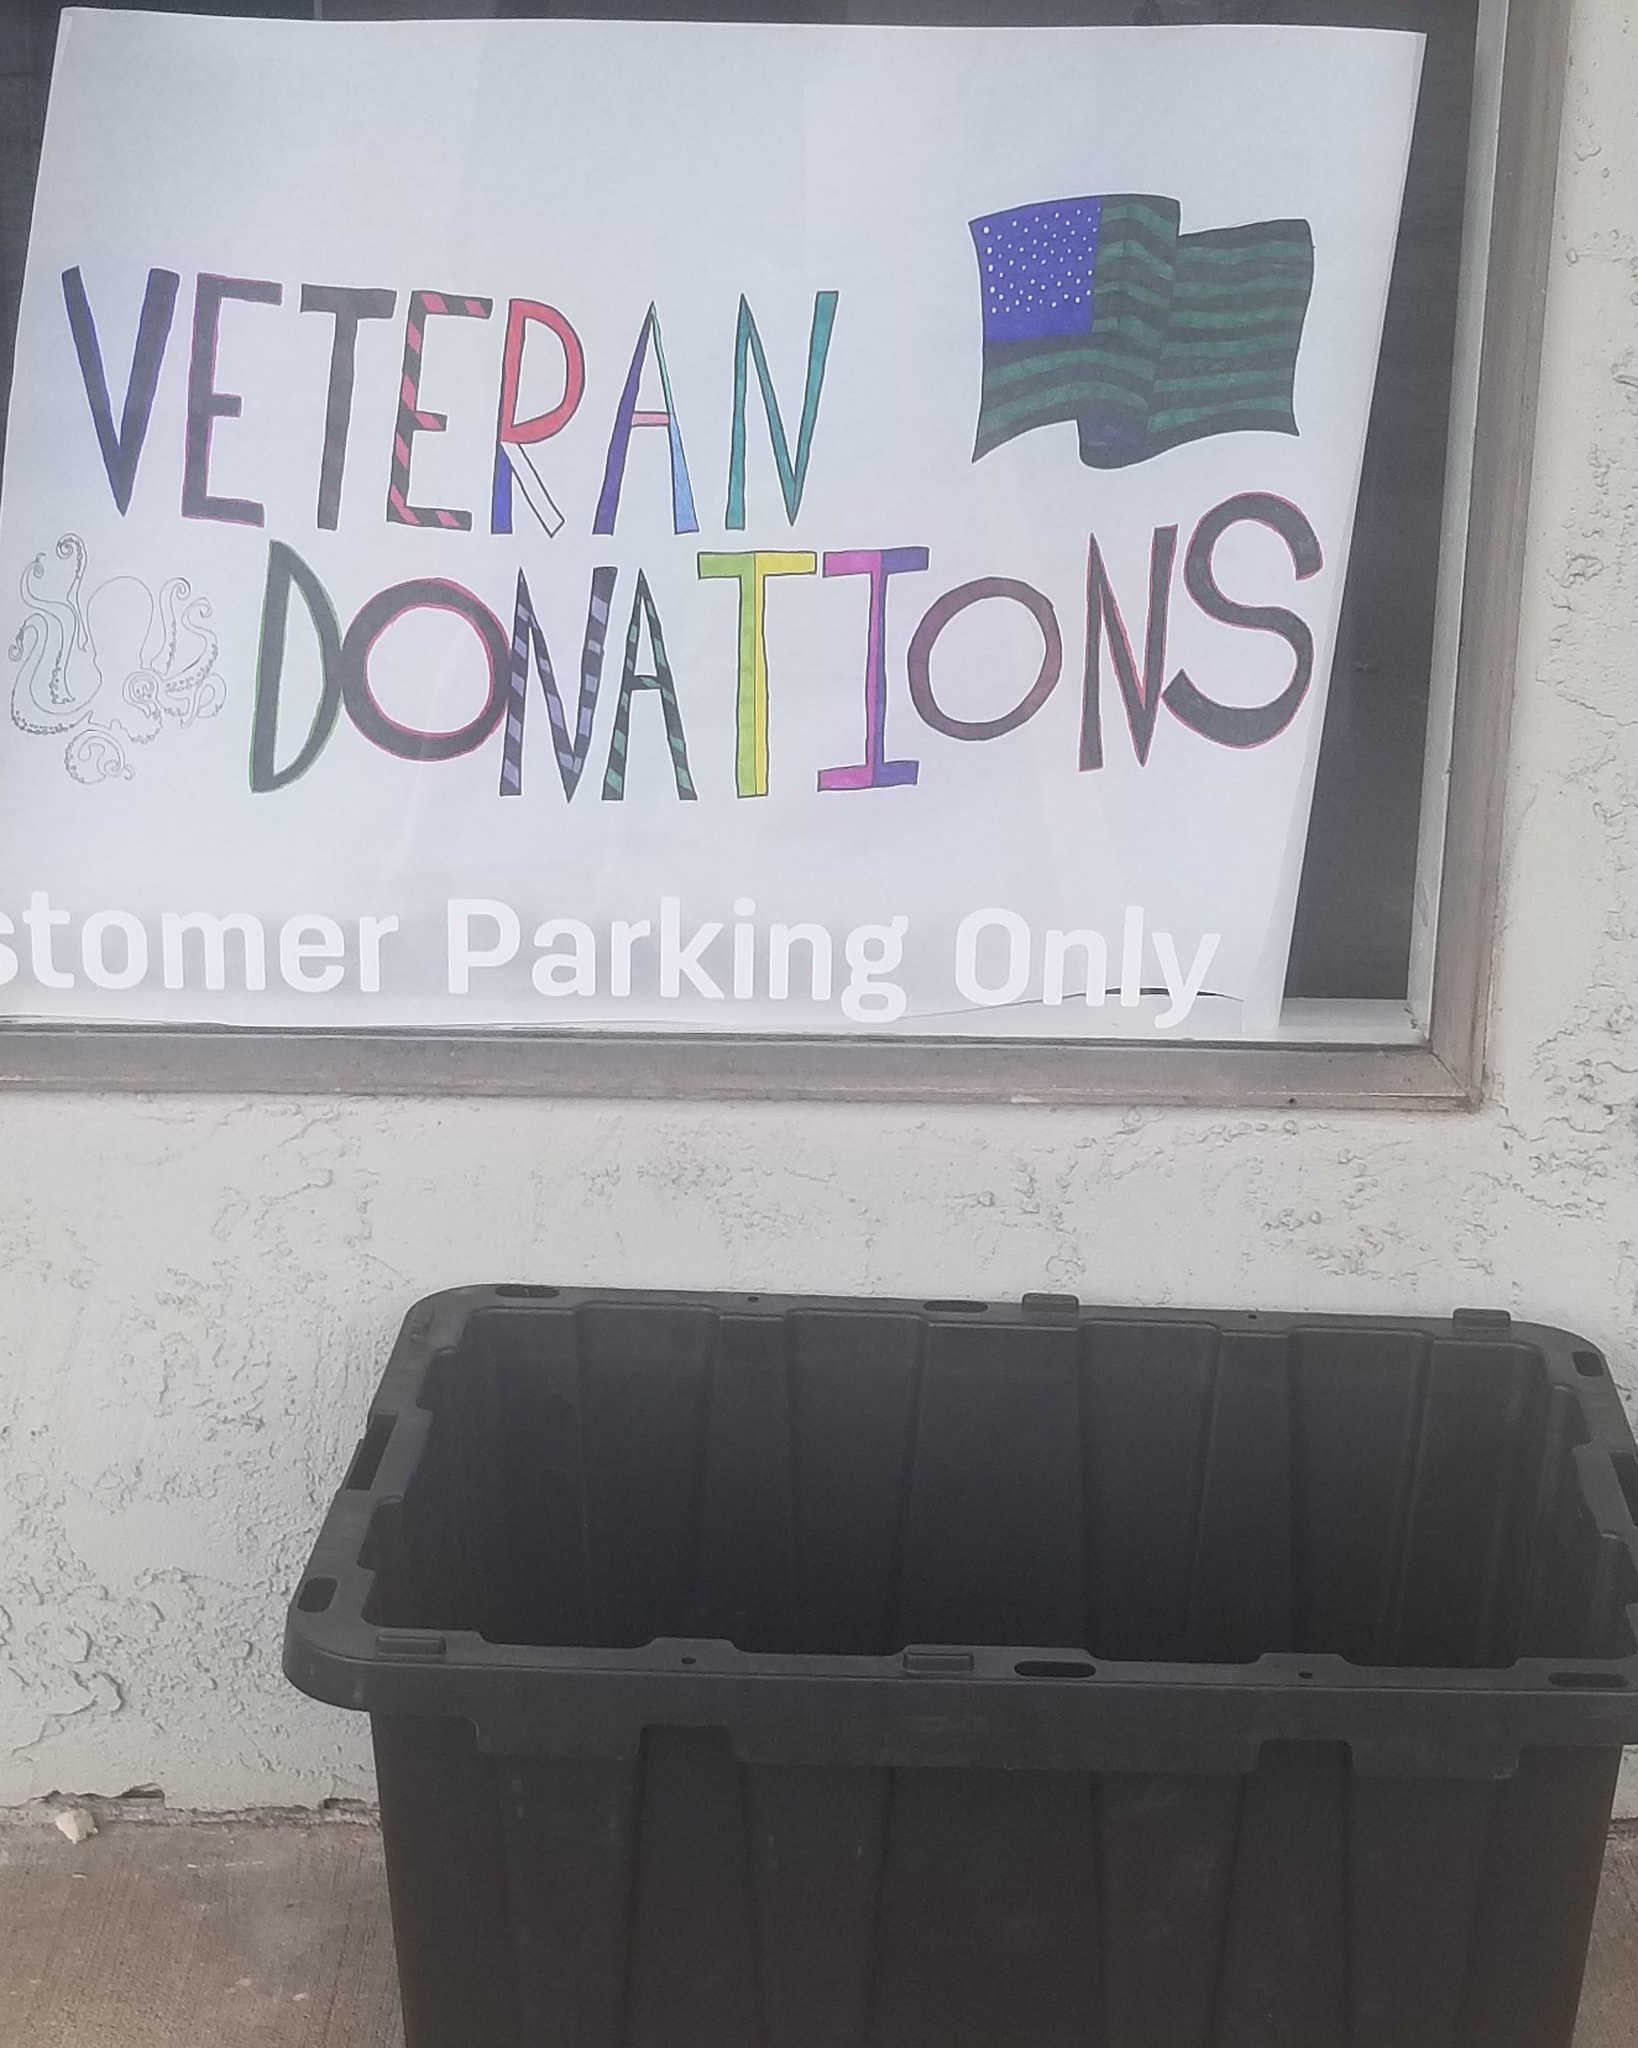 Holiday Donation Drive for Veterans